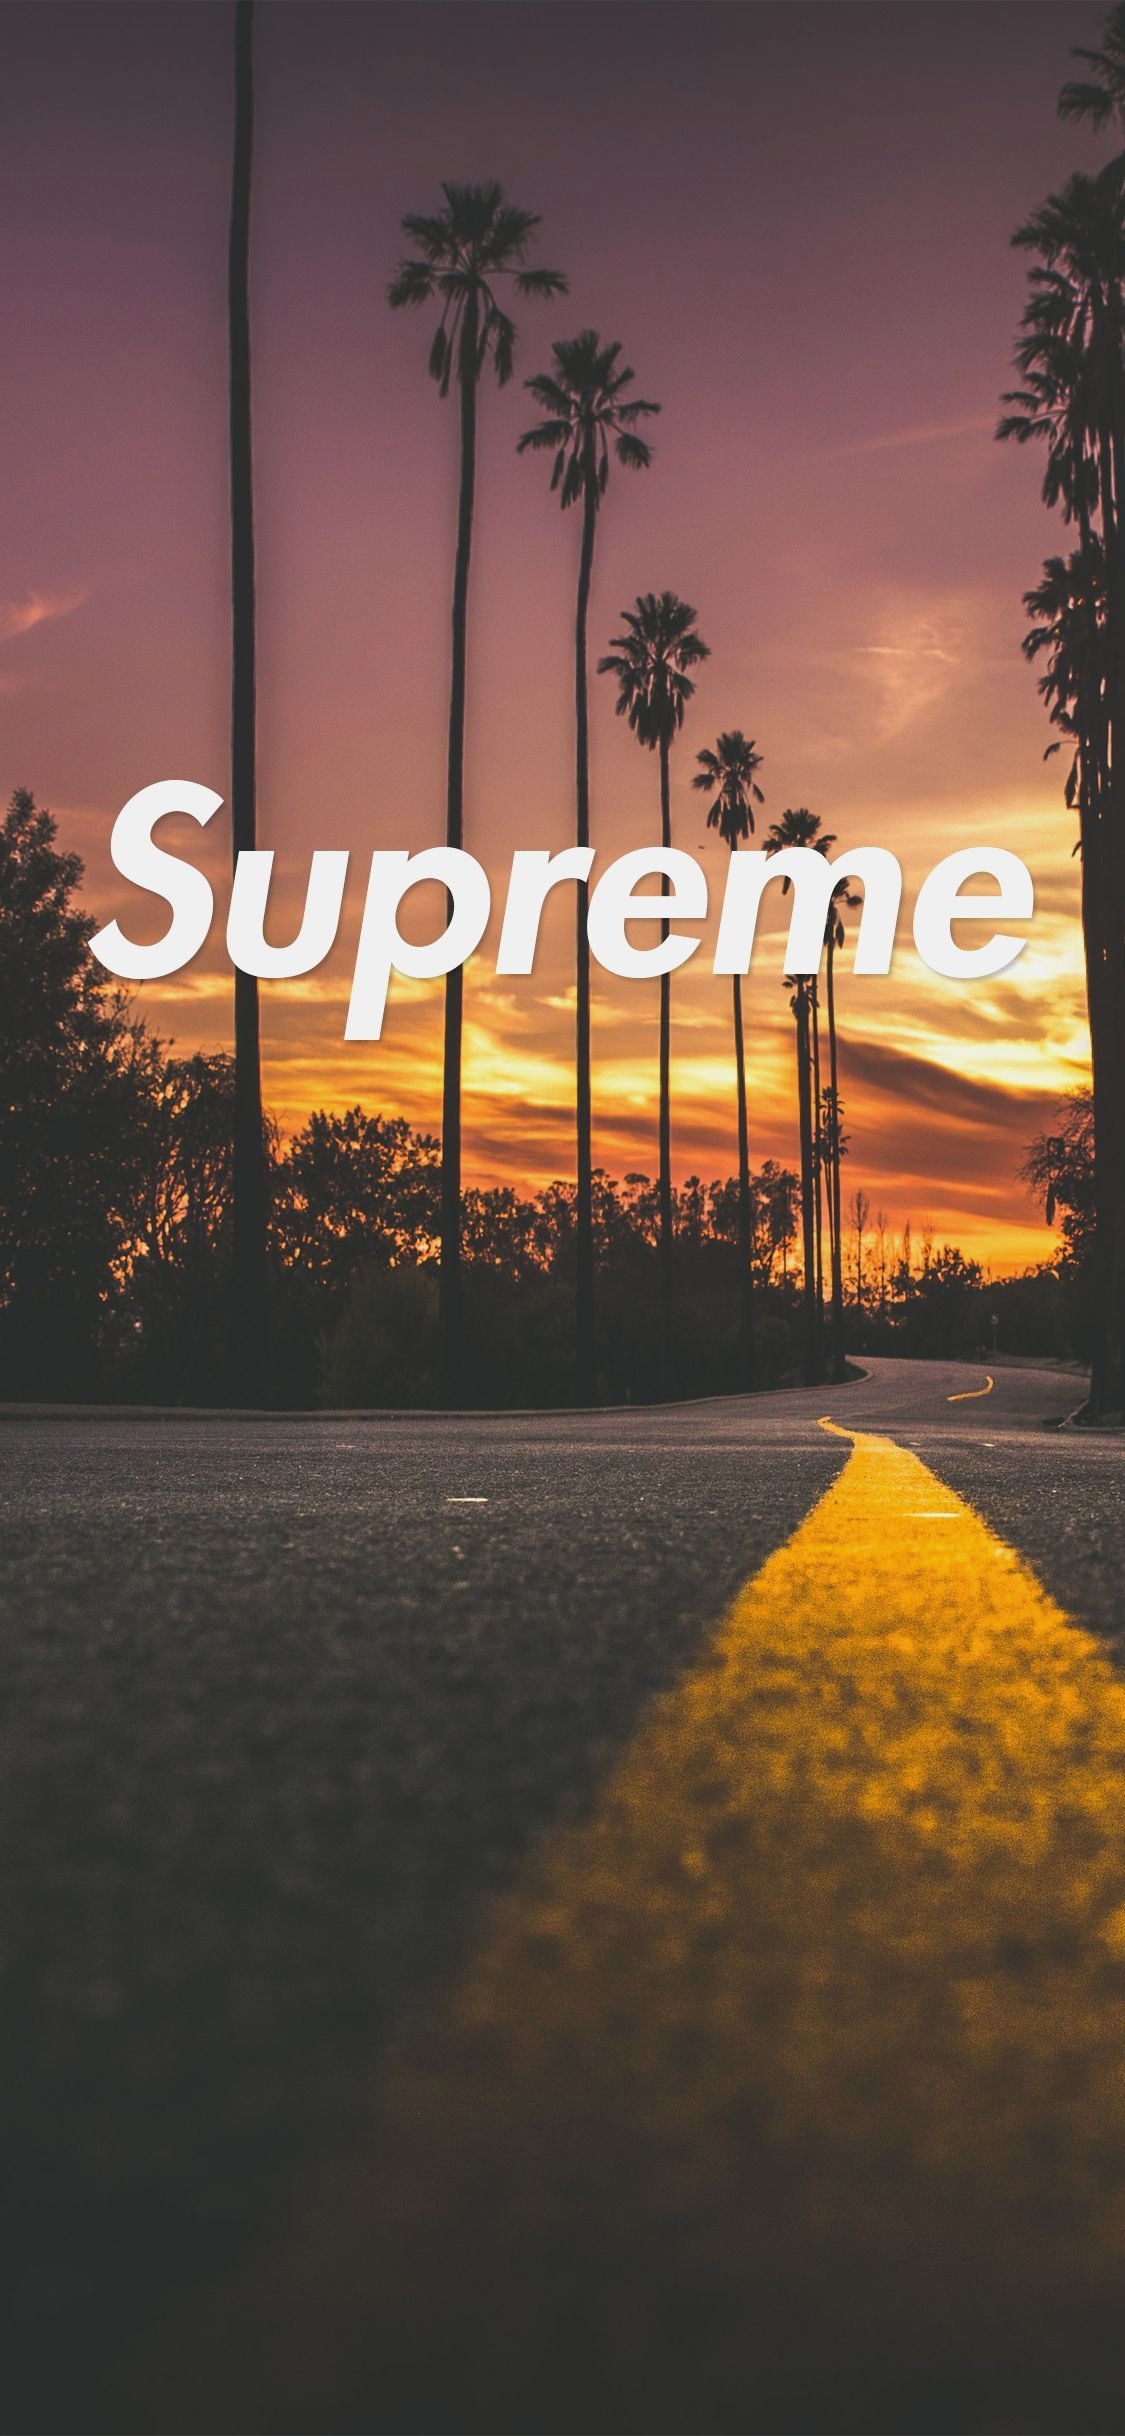 Supreme Cool Wallpaper Iphone Cute Cool For Wallpaper   Iphone Xs